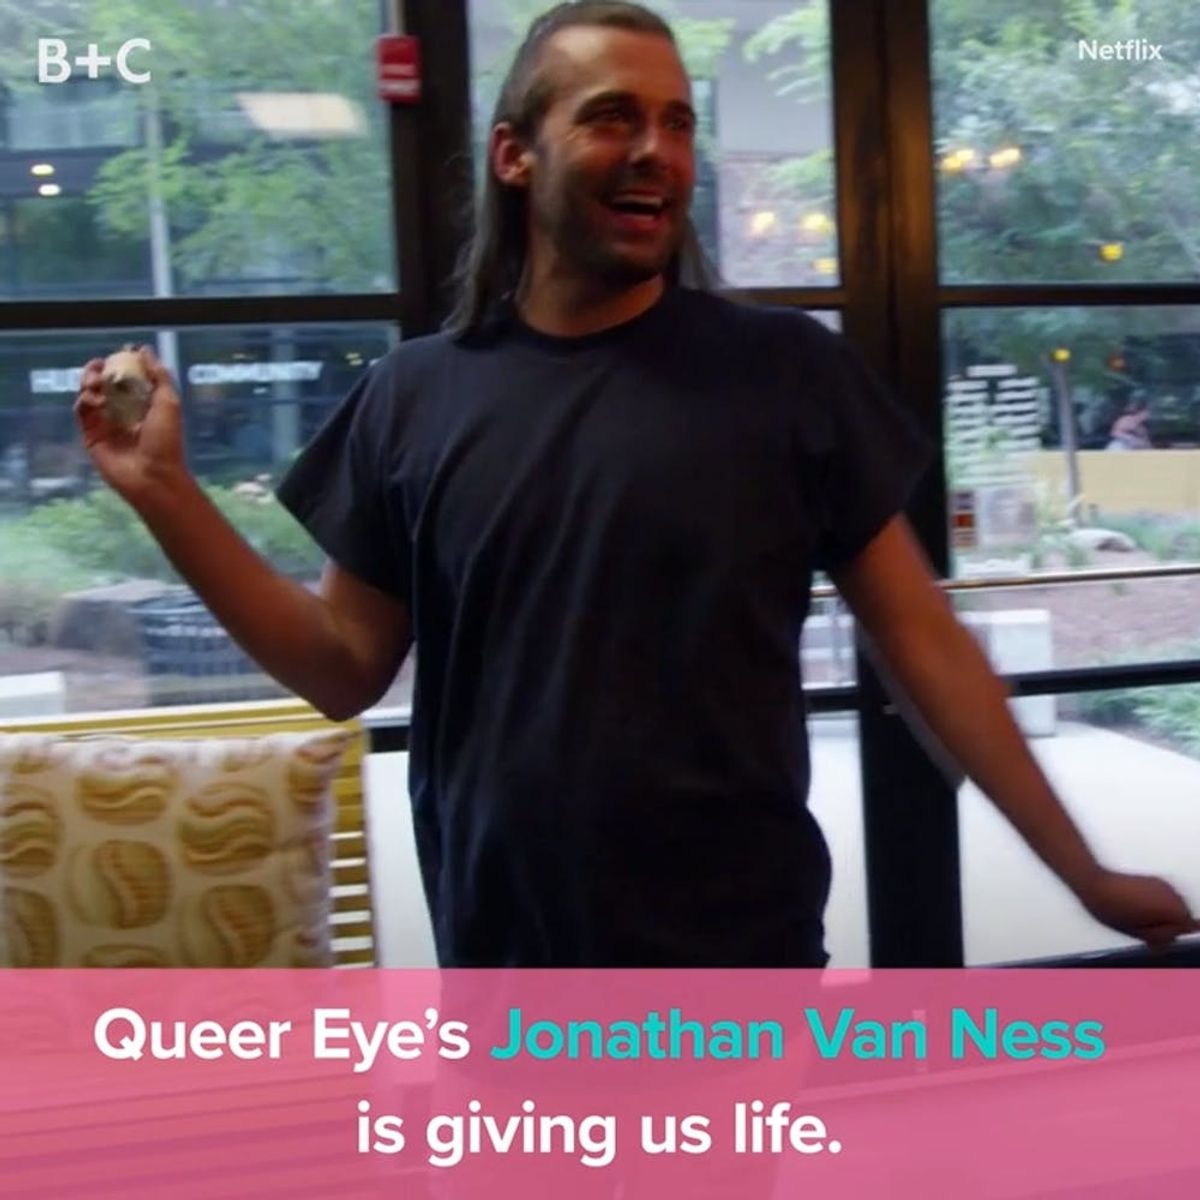 Jonathan Van Ness From â€˜Queer Eyeâ€™ Is Giving Us Life